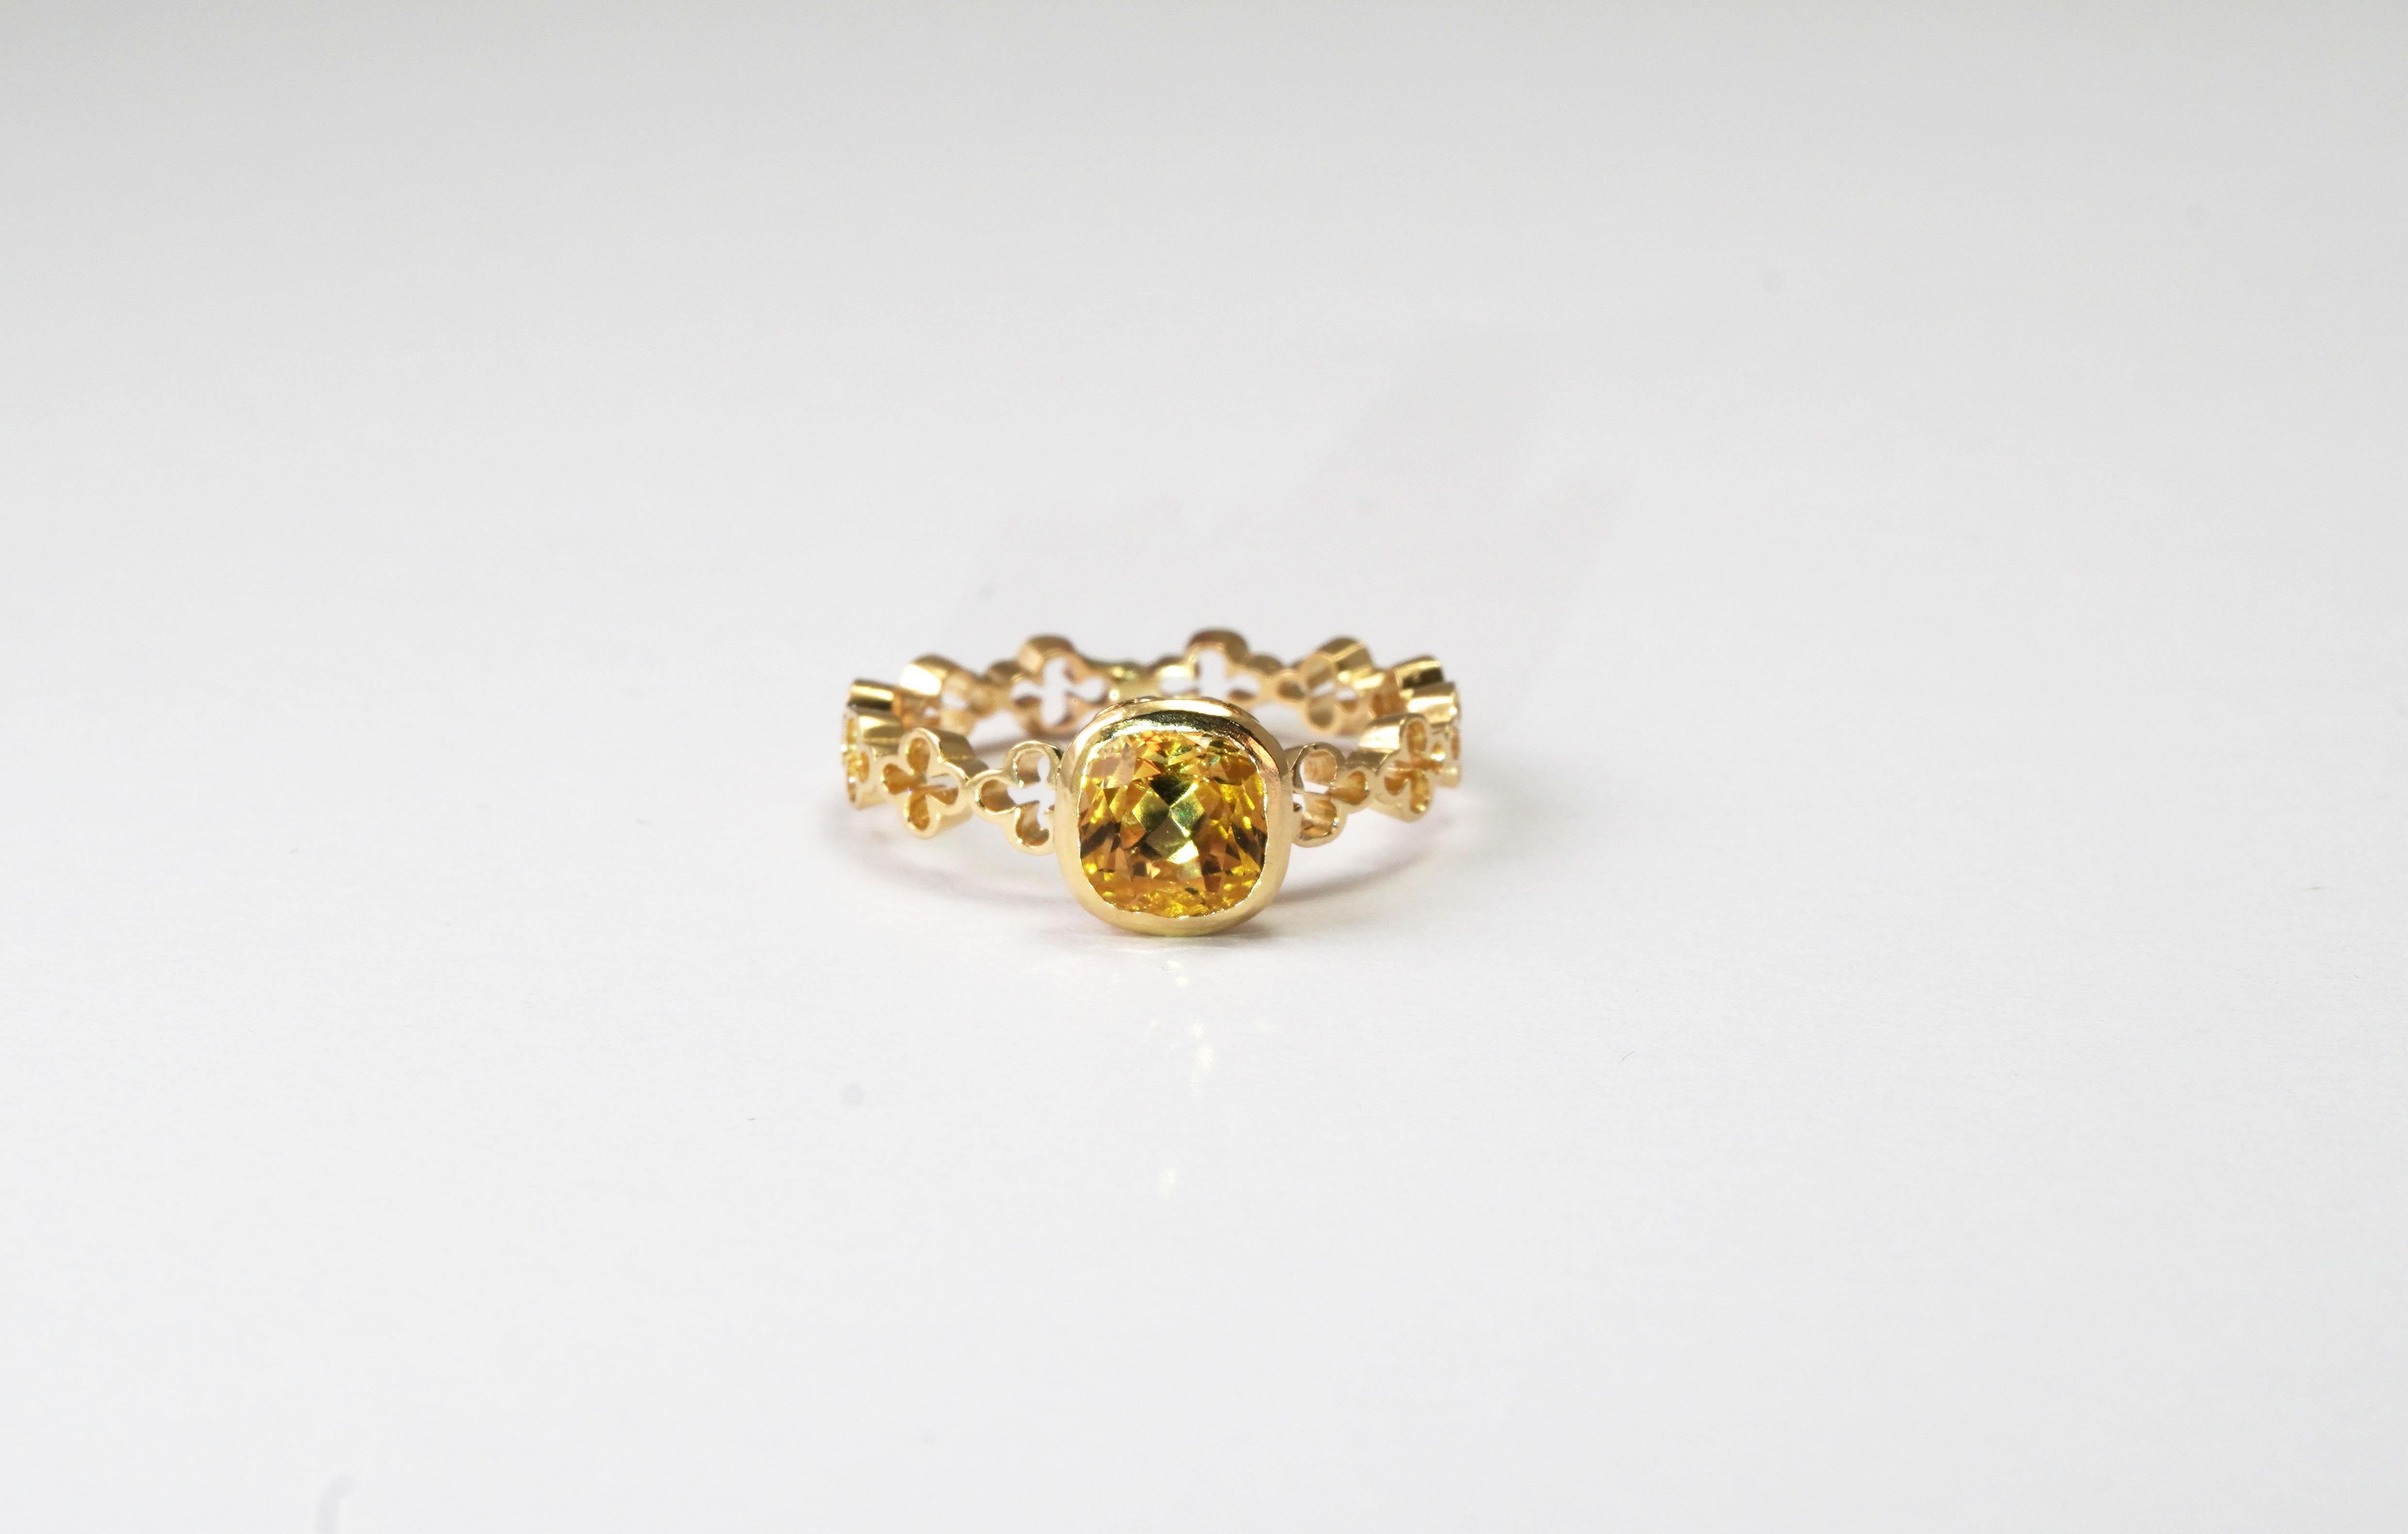 14 kt Gold ring with Heliodor
Gold color: Yellow
Ring size: 6 US
Total weight: 1.70 grams

Set with:
- Heliodor
Cut: Cushion
Total weight: 1.01 carats
Color: Yellow